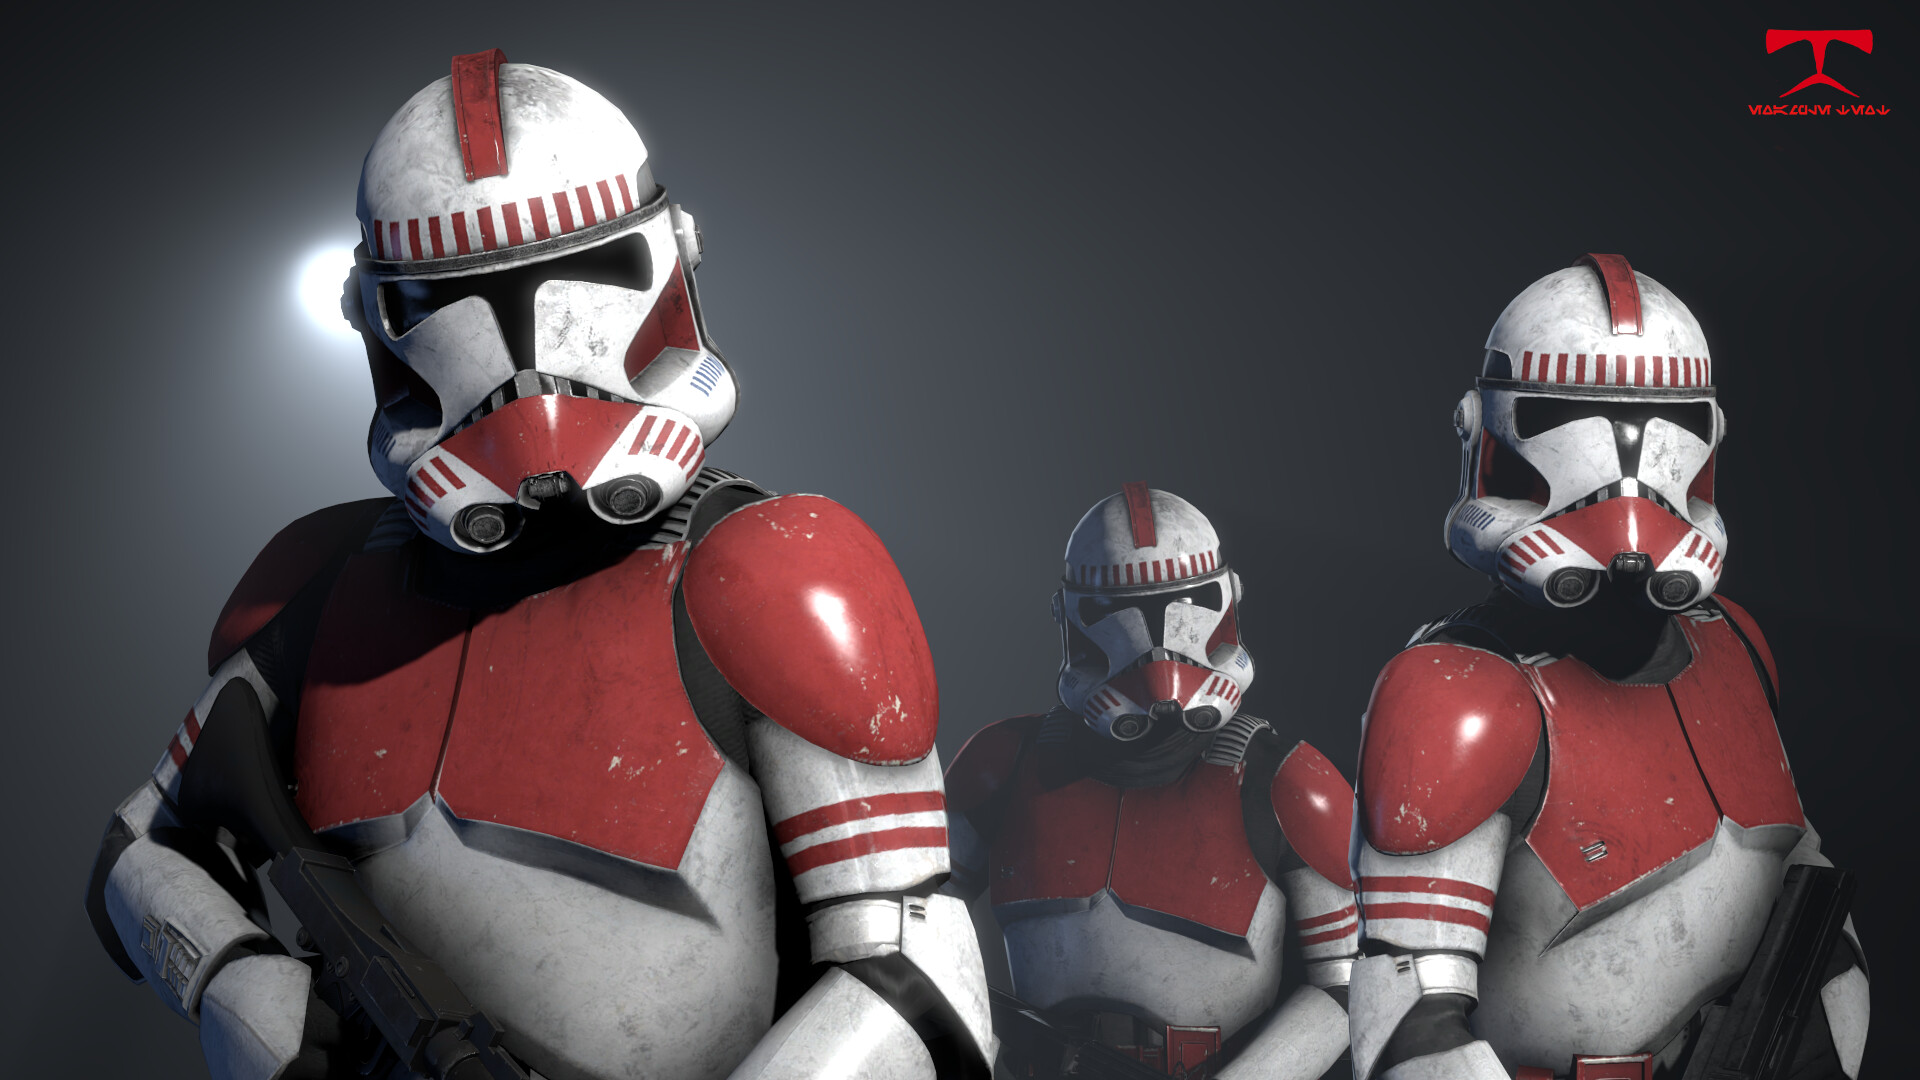 The Coruscant Guard Shock Troopers, Isaac Aceret